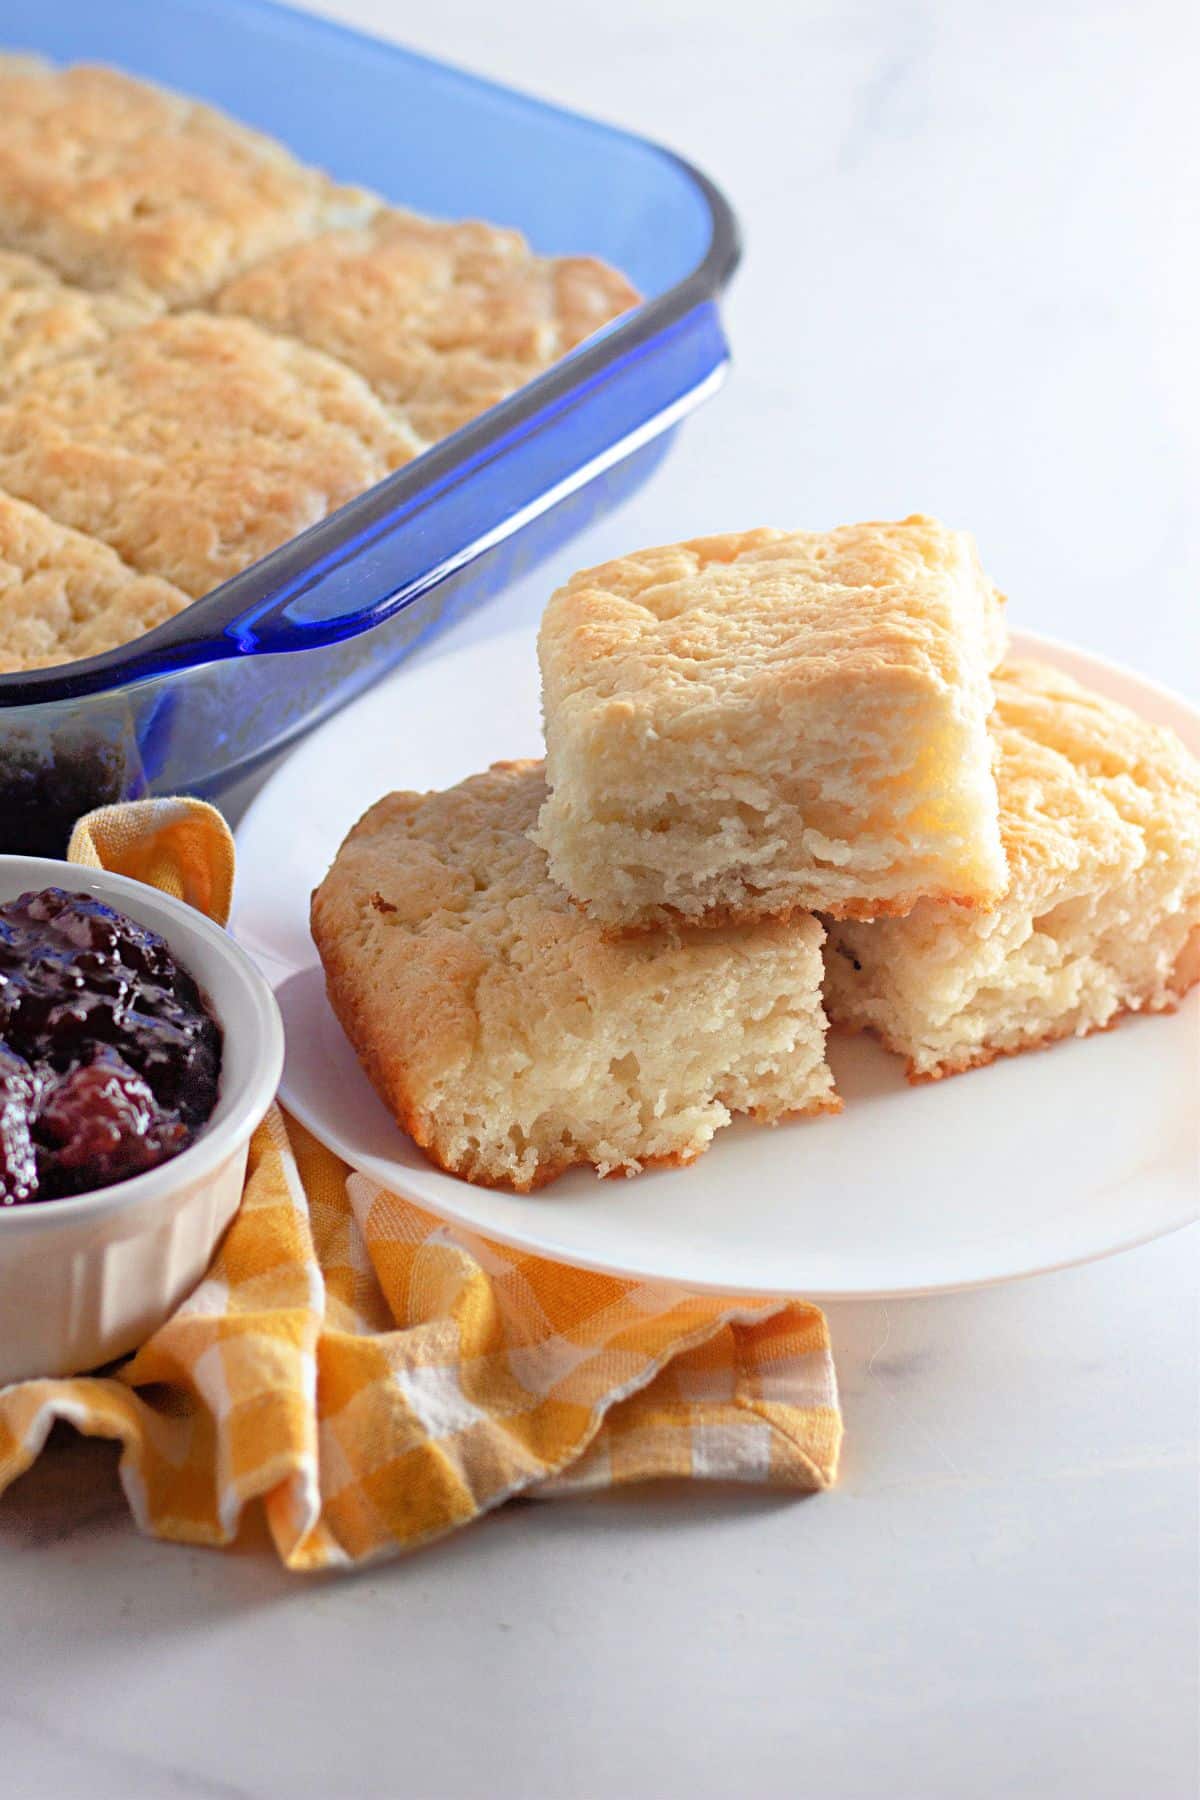 Biscuits stacked on a white plate next to a baking dish a bowl of jam.